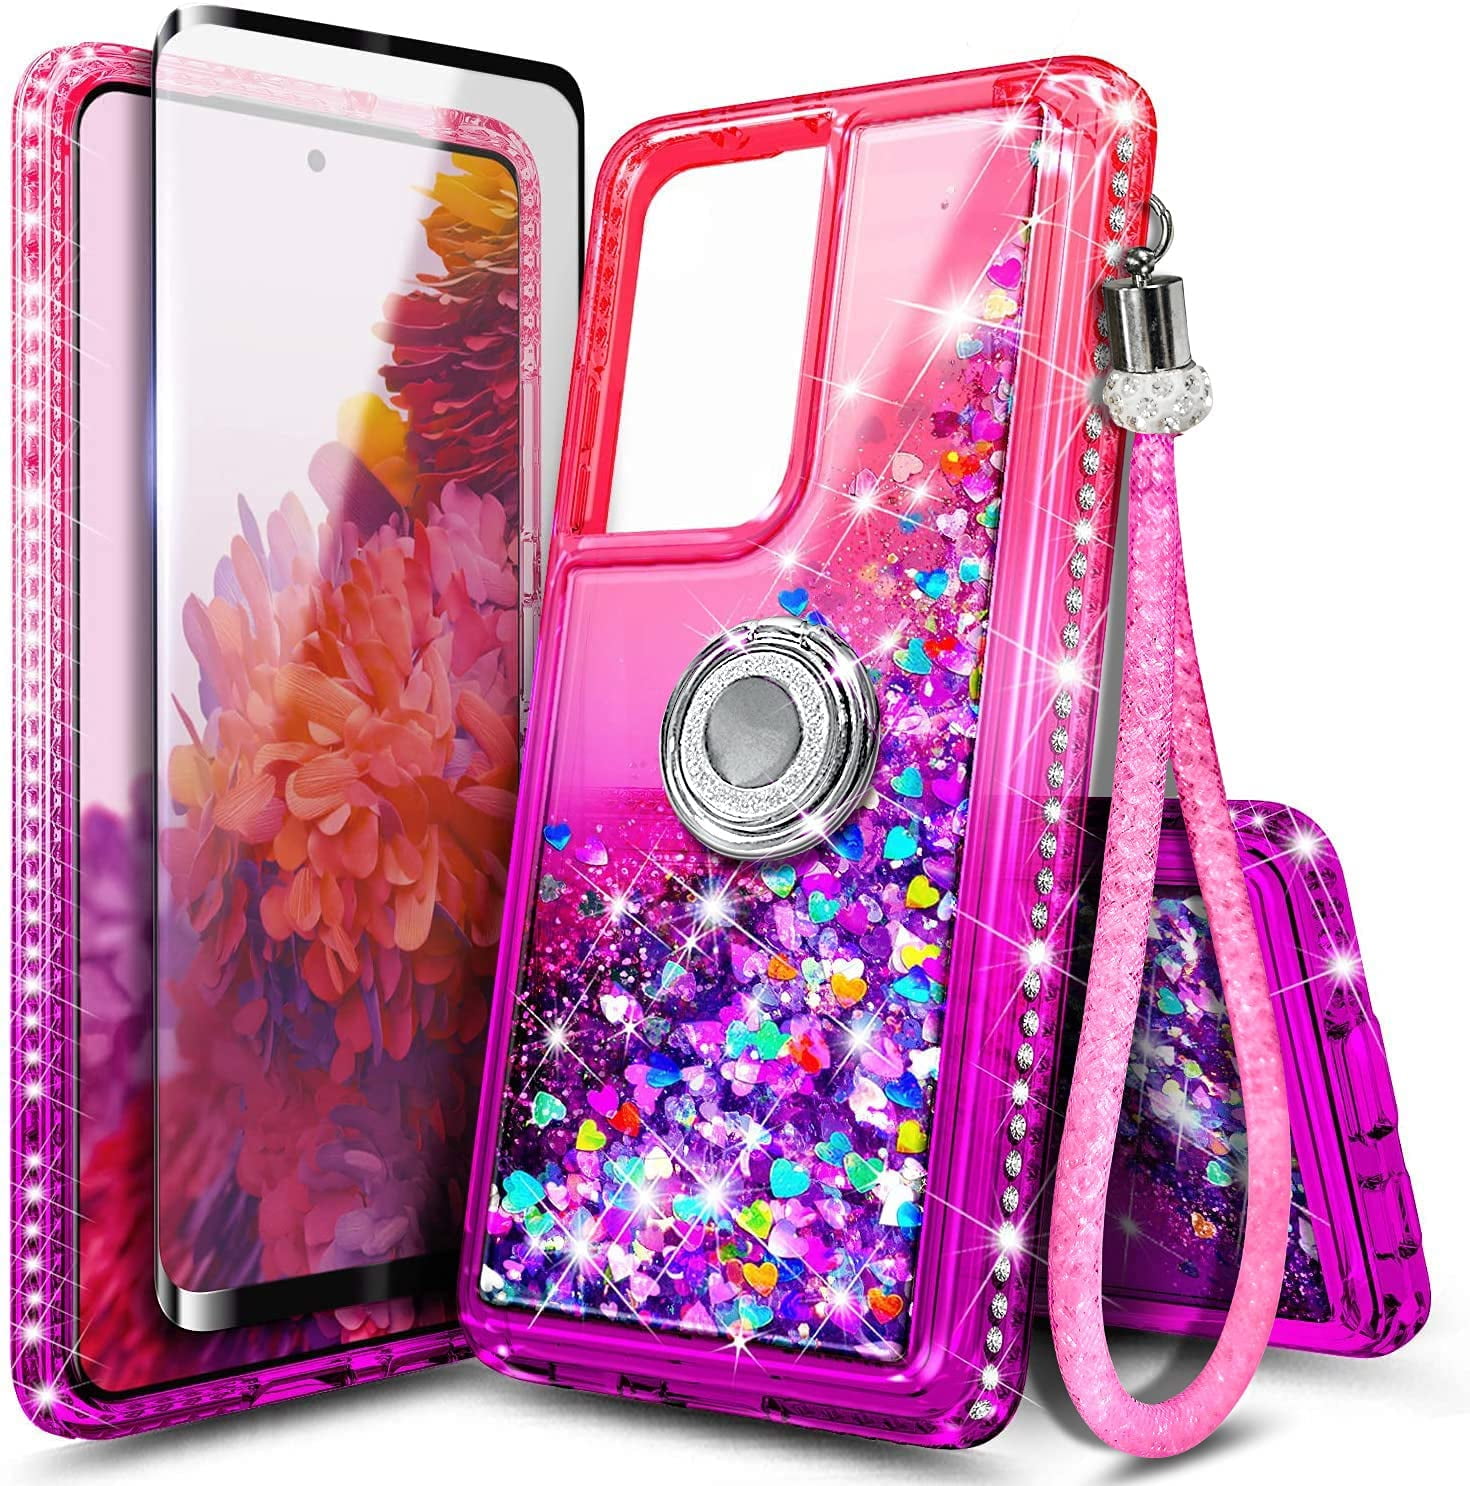 Goocrux (2in1 for Samsung Galaxy S21 Case Cute Women Girls Phone Cover  Design with Slide Camera Cover+Ring Holder Unique Distorted Pink Teen Cases  for